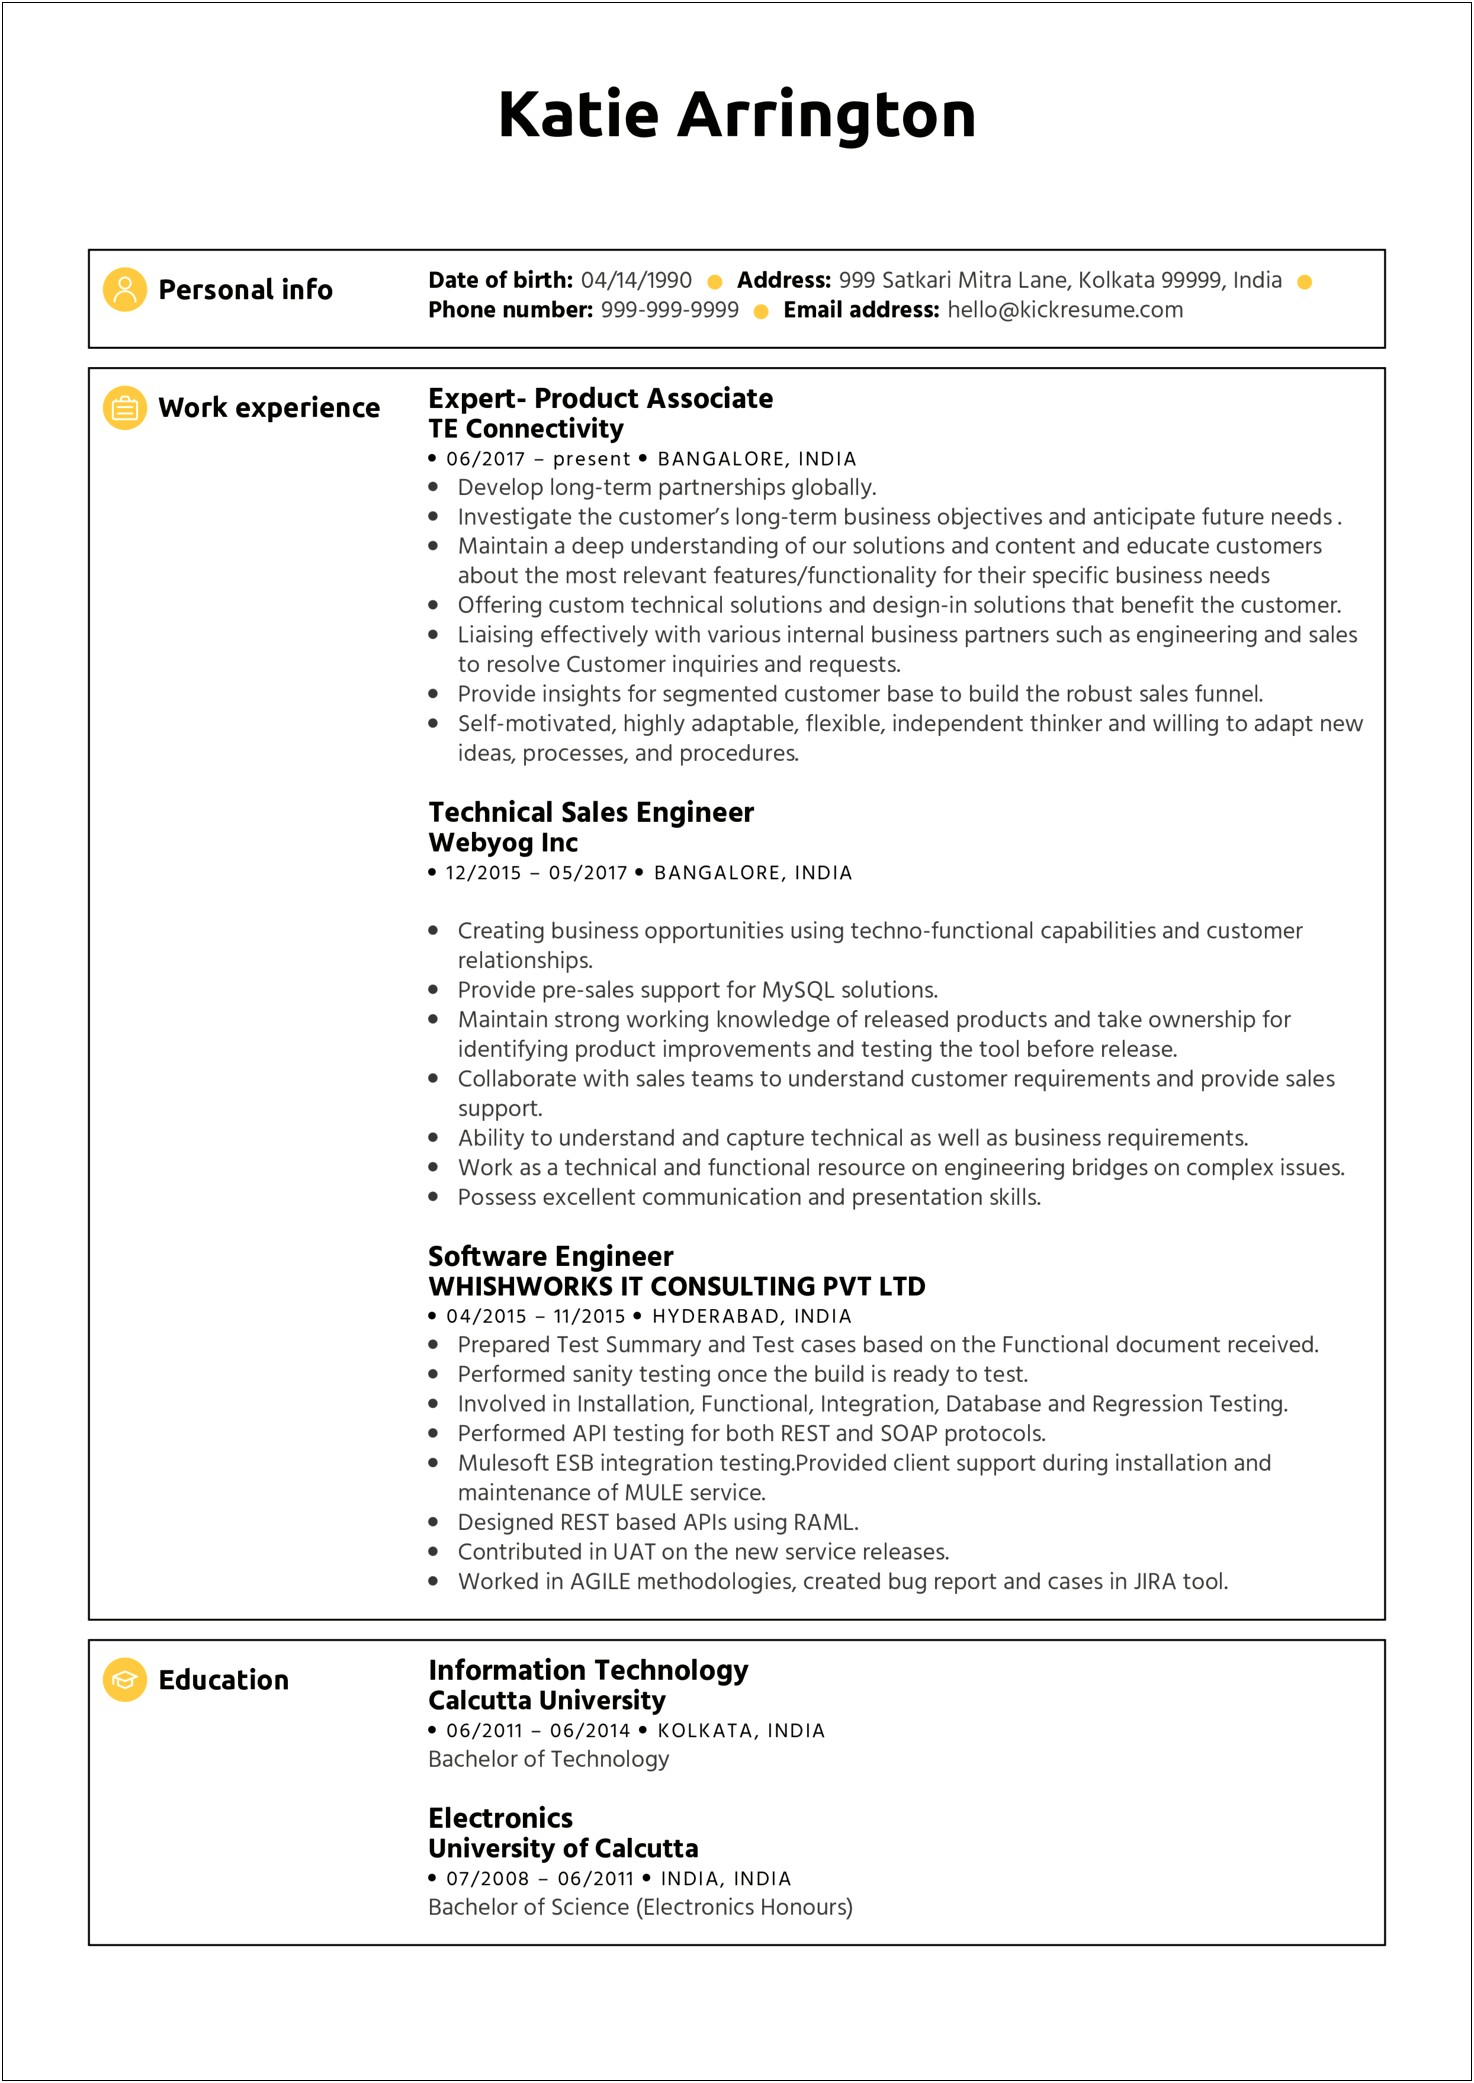 Resume For Analyst Involved In Agile Methodology Experience